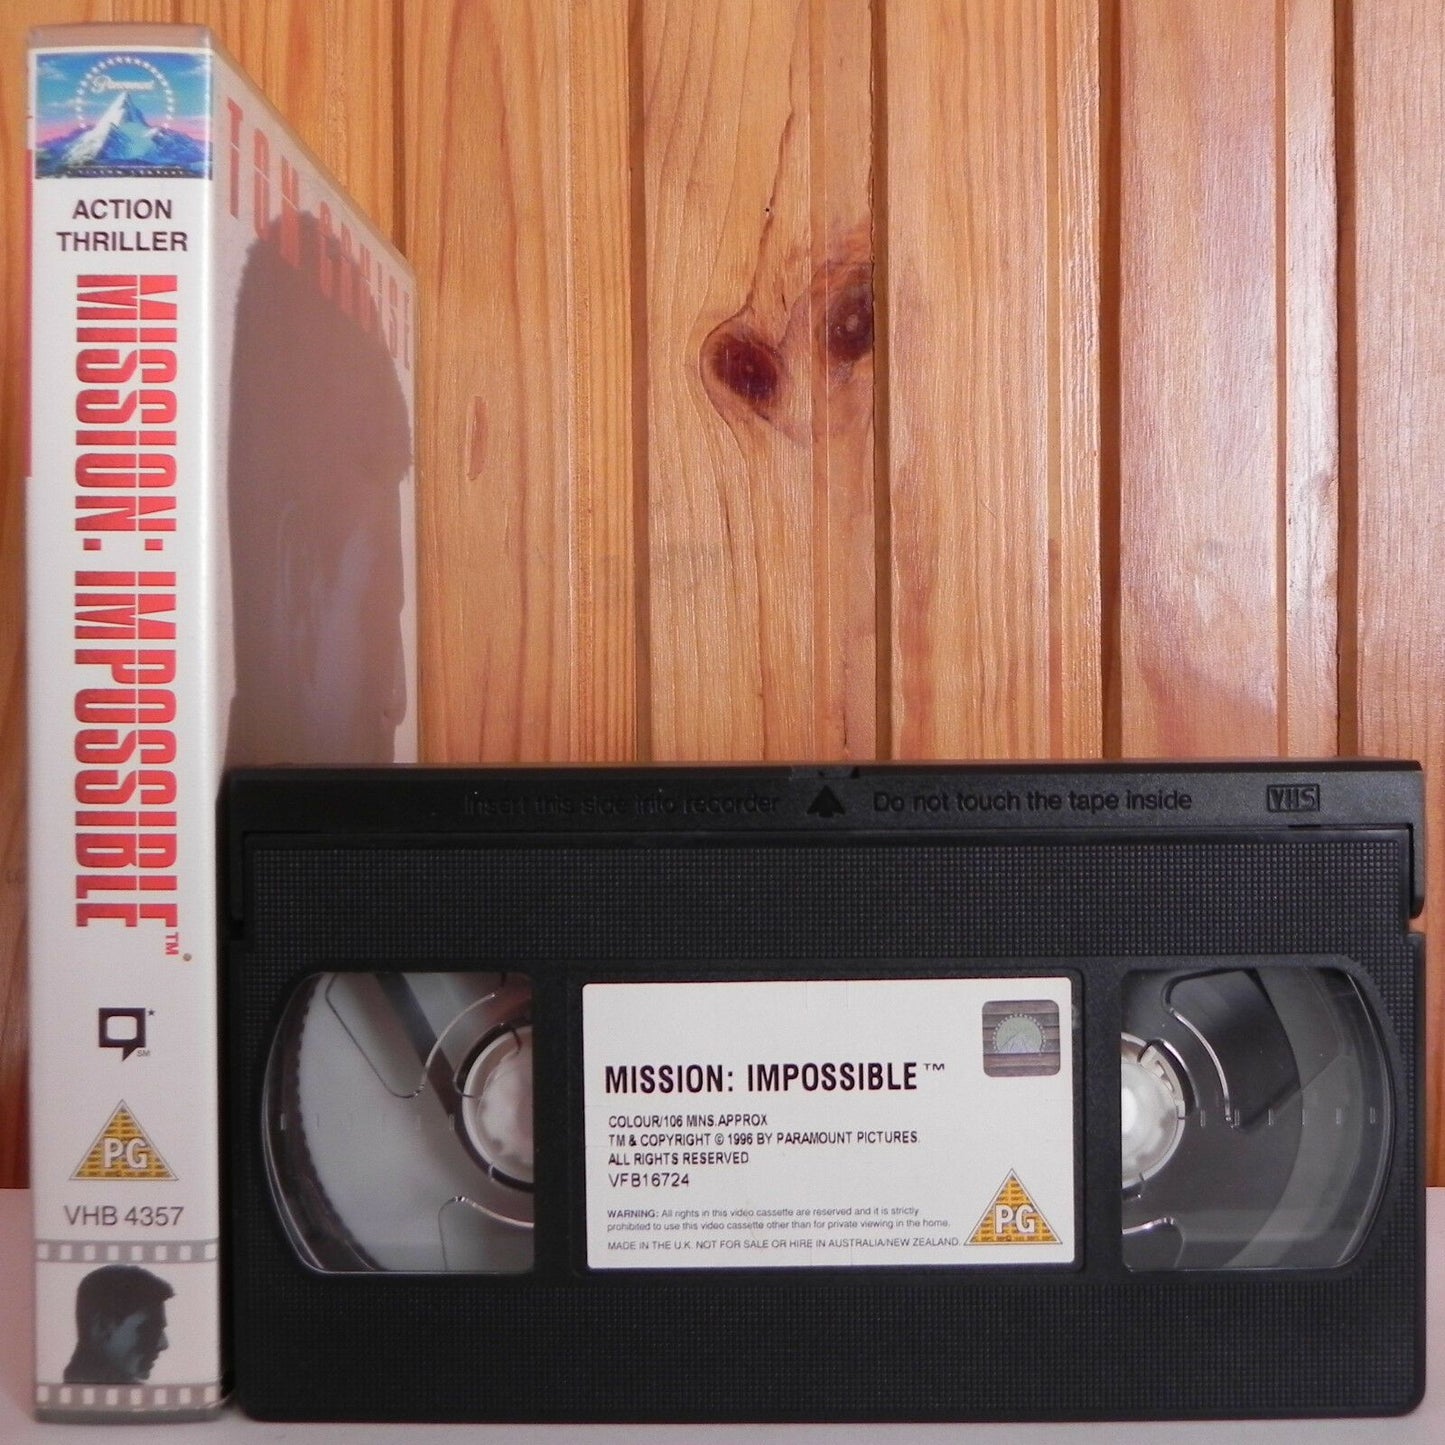 Mission: Impossible - Large Box - Paramount - Action - Sample - Tom Cruise - VHS-